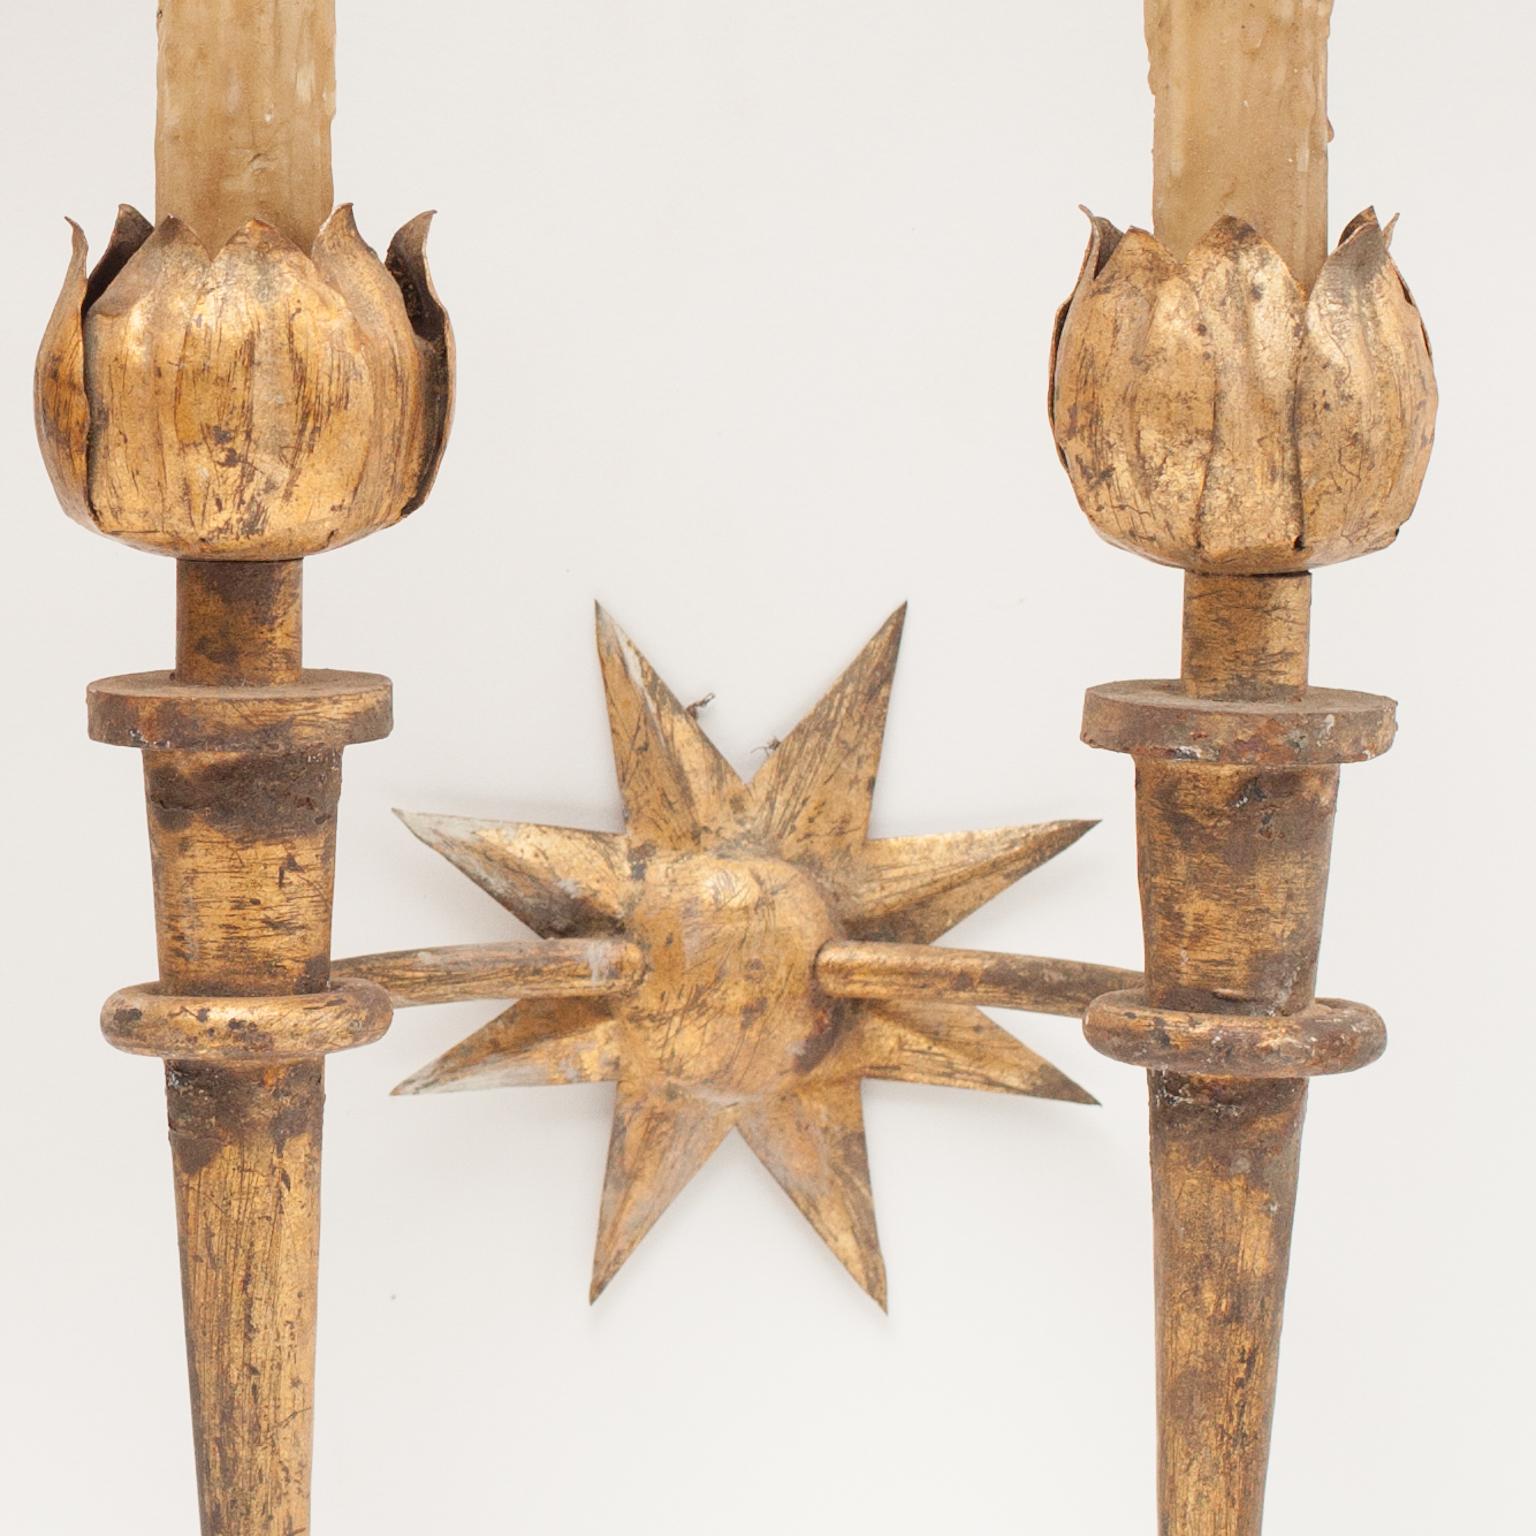 Pair of gold patinated wrought iron wall sconces Gilbert Poillerat style. The wrought iron becomes decoration of flames in the lower part, and in flower petals in the upper part, they rest on a golden star. Each sconce is newly rewired.